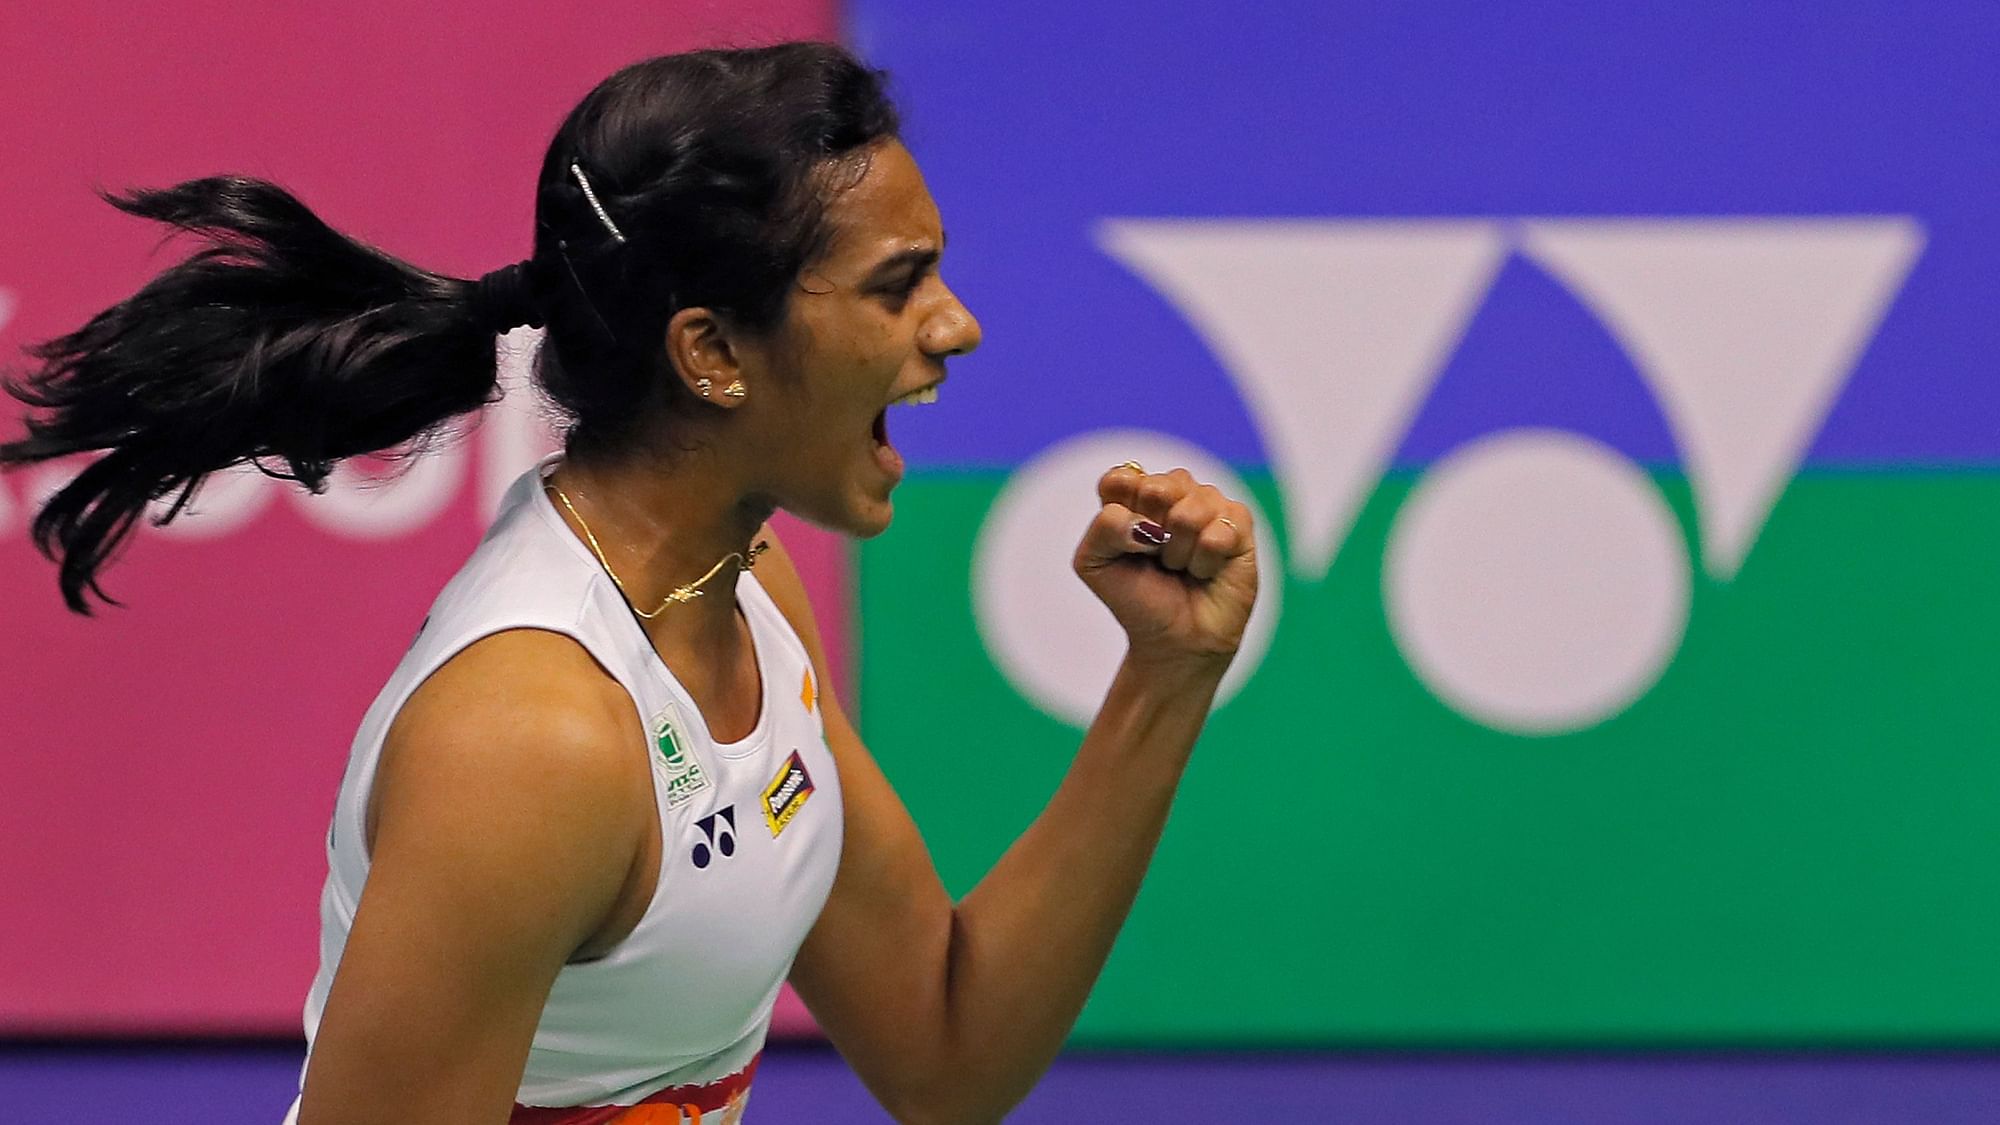 PV Sindhu has entered the second round of the Indonesia Masters.